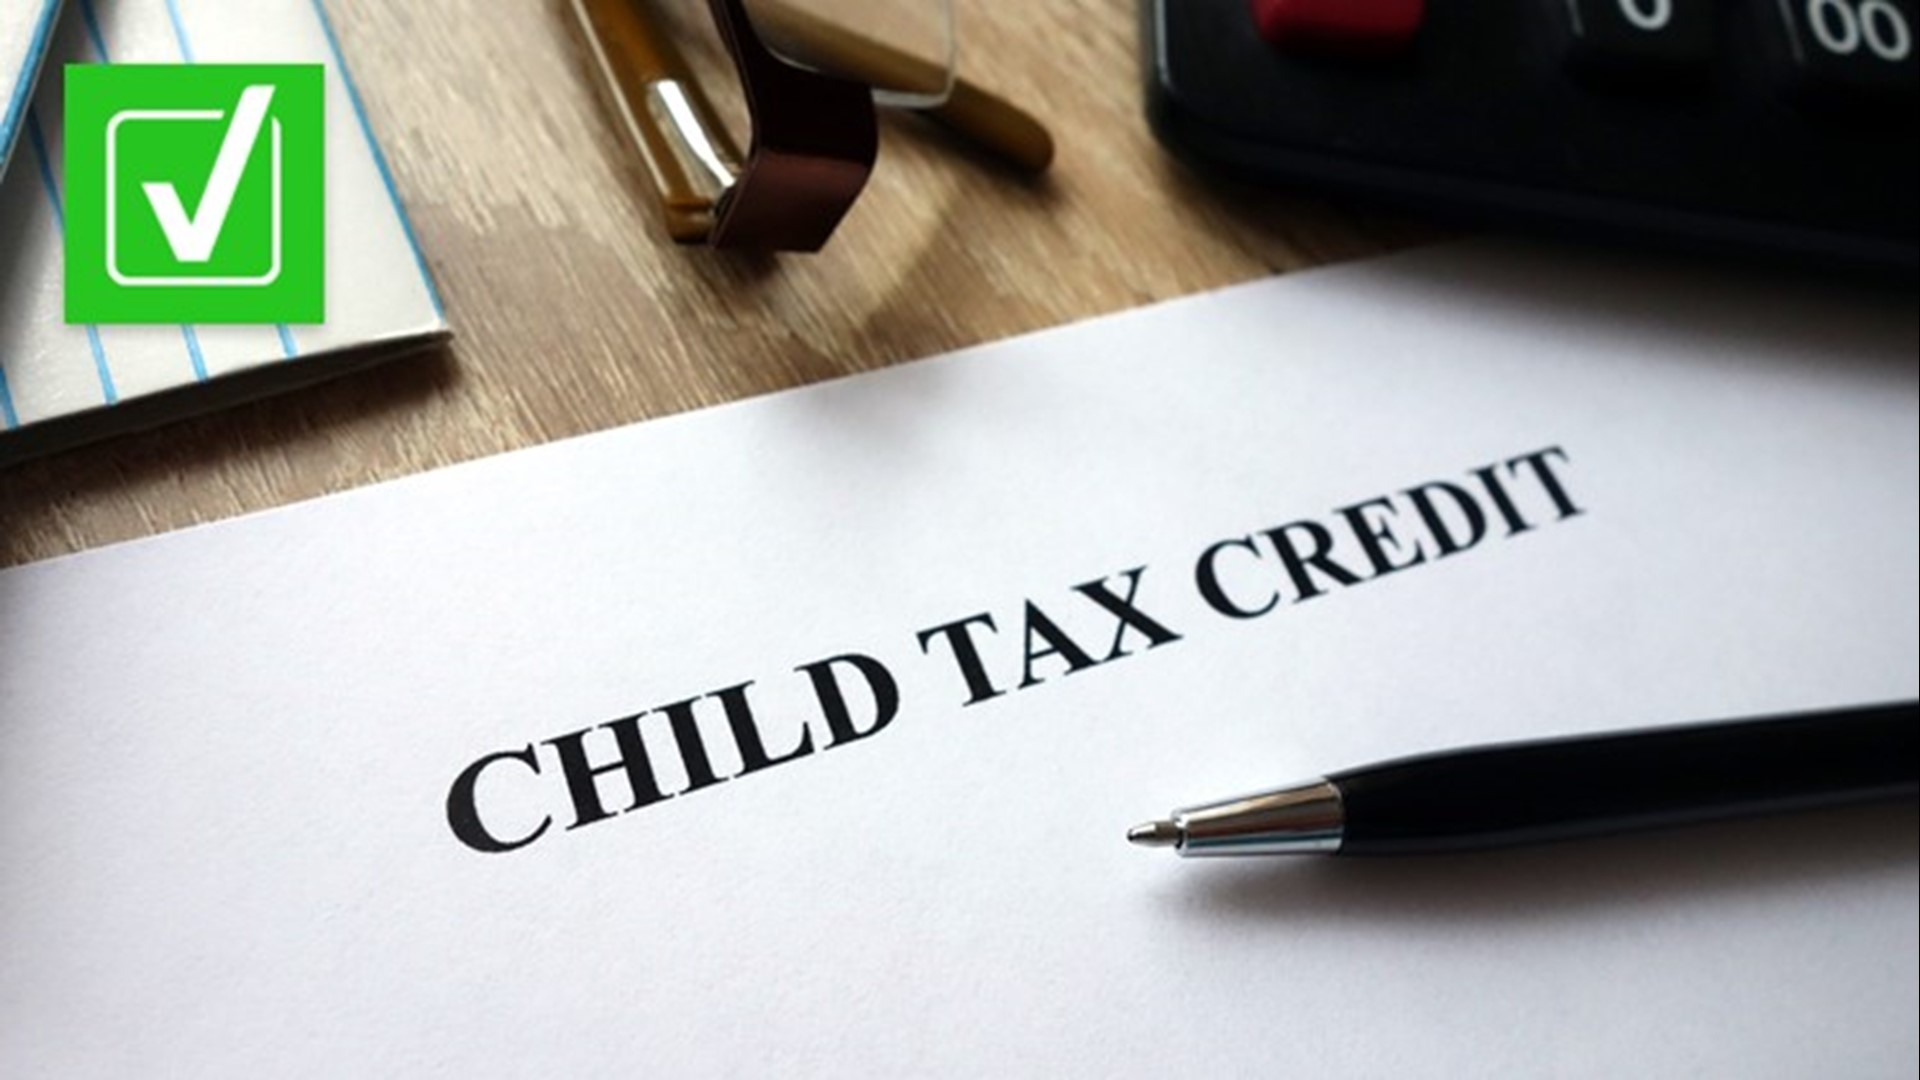 The IRS this week announced an online tool that non-filers can use to register for child tax credit payments. The first advance payments go out July 15.